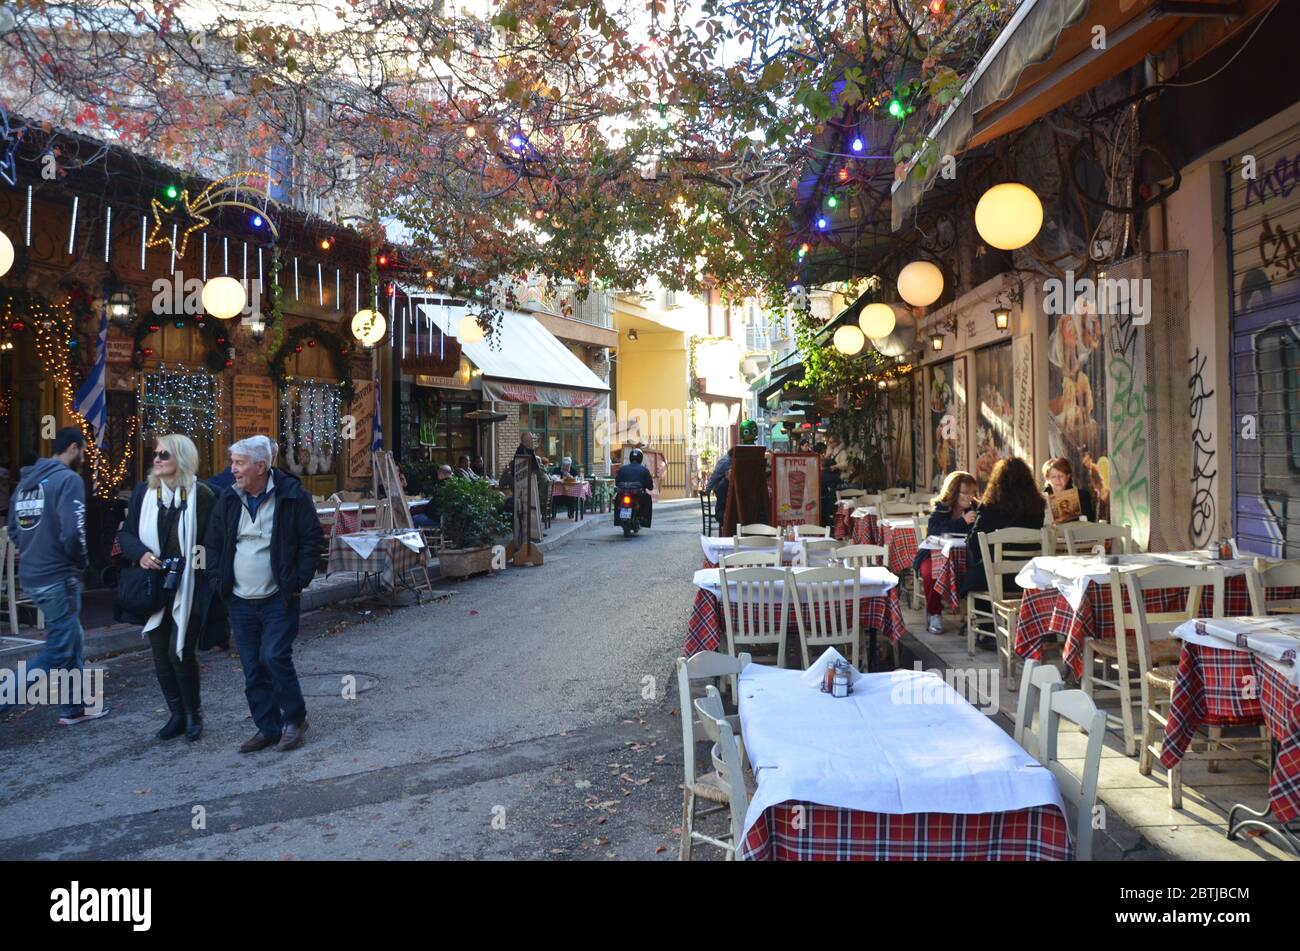 Plaka District, which resides under the Acropolis and spreads out to Syntagma. The area is well-known for its food, boutique shops and cafes. Stock Photo